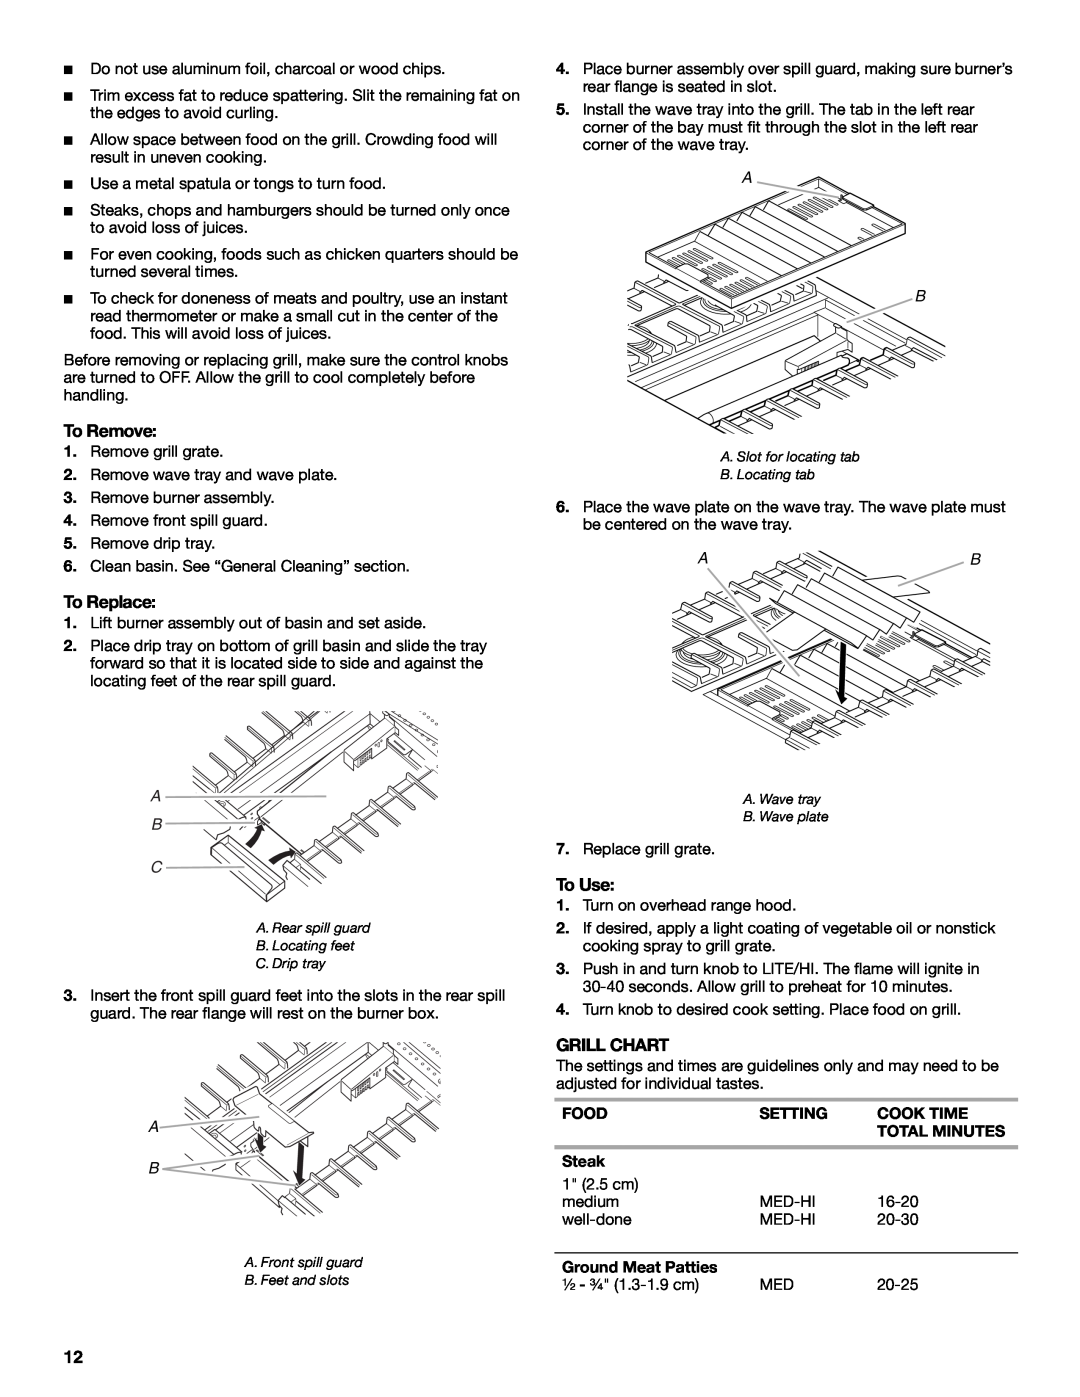 KitchenAid KDRP407 KDRP462 manual To Remove, To Replace, To Use, Grill Chart, A B C 